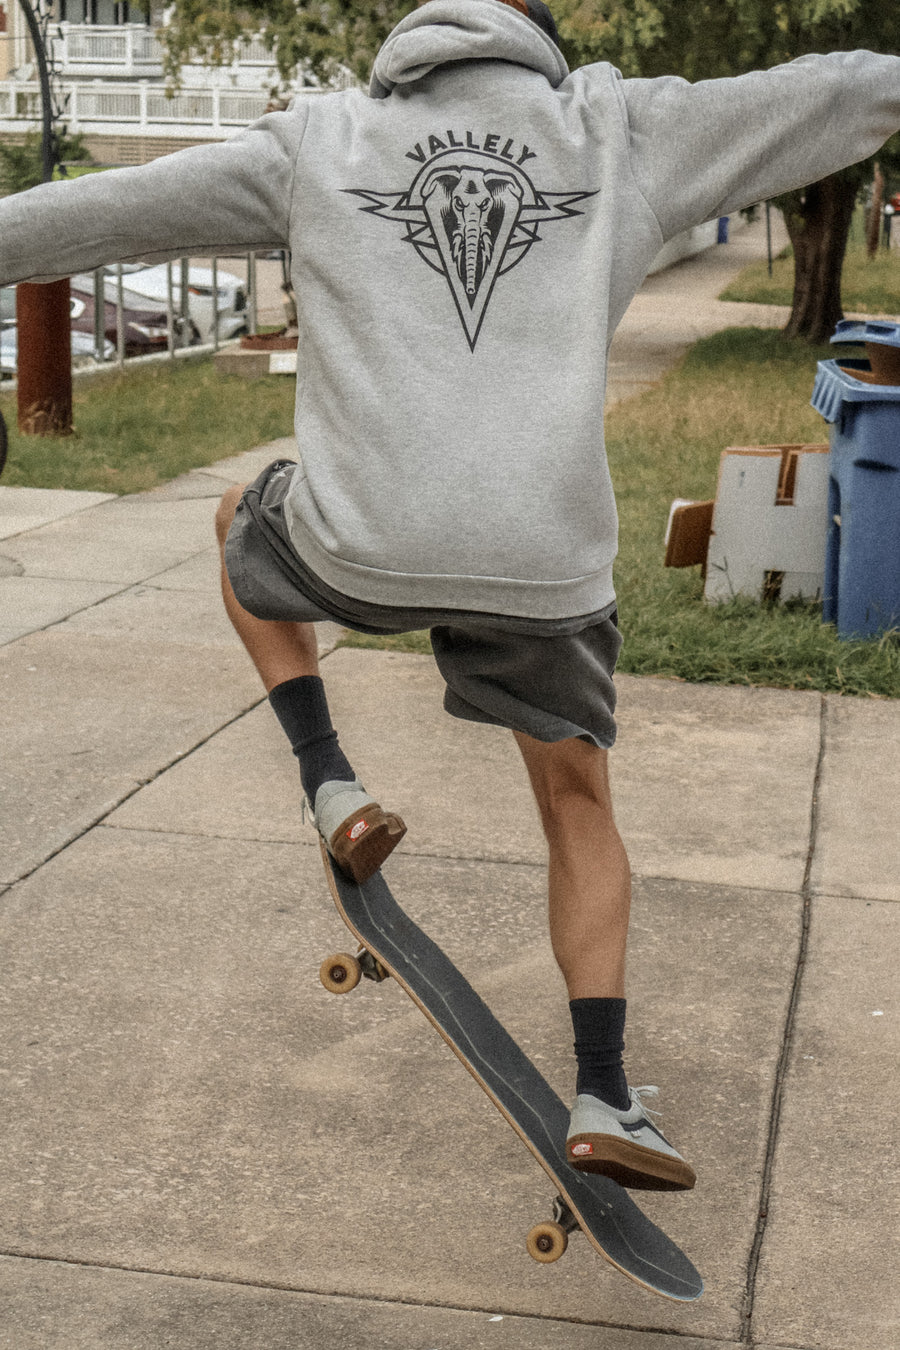 Skateboarder doing tricks on a sidewalk in the city while wearing the Dirty Donny x Mike Vallely Collaboration Heather Gray Hoodie and Black Logo Hat